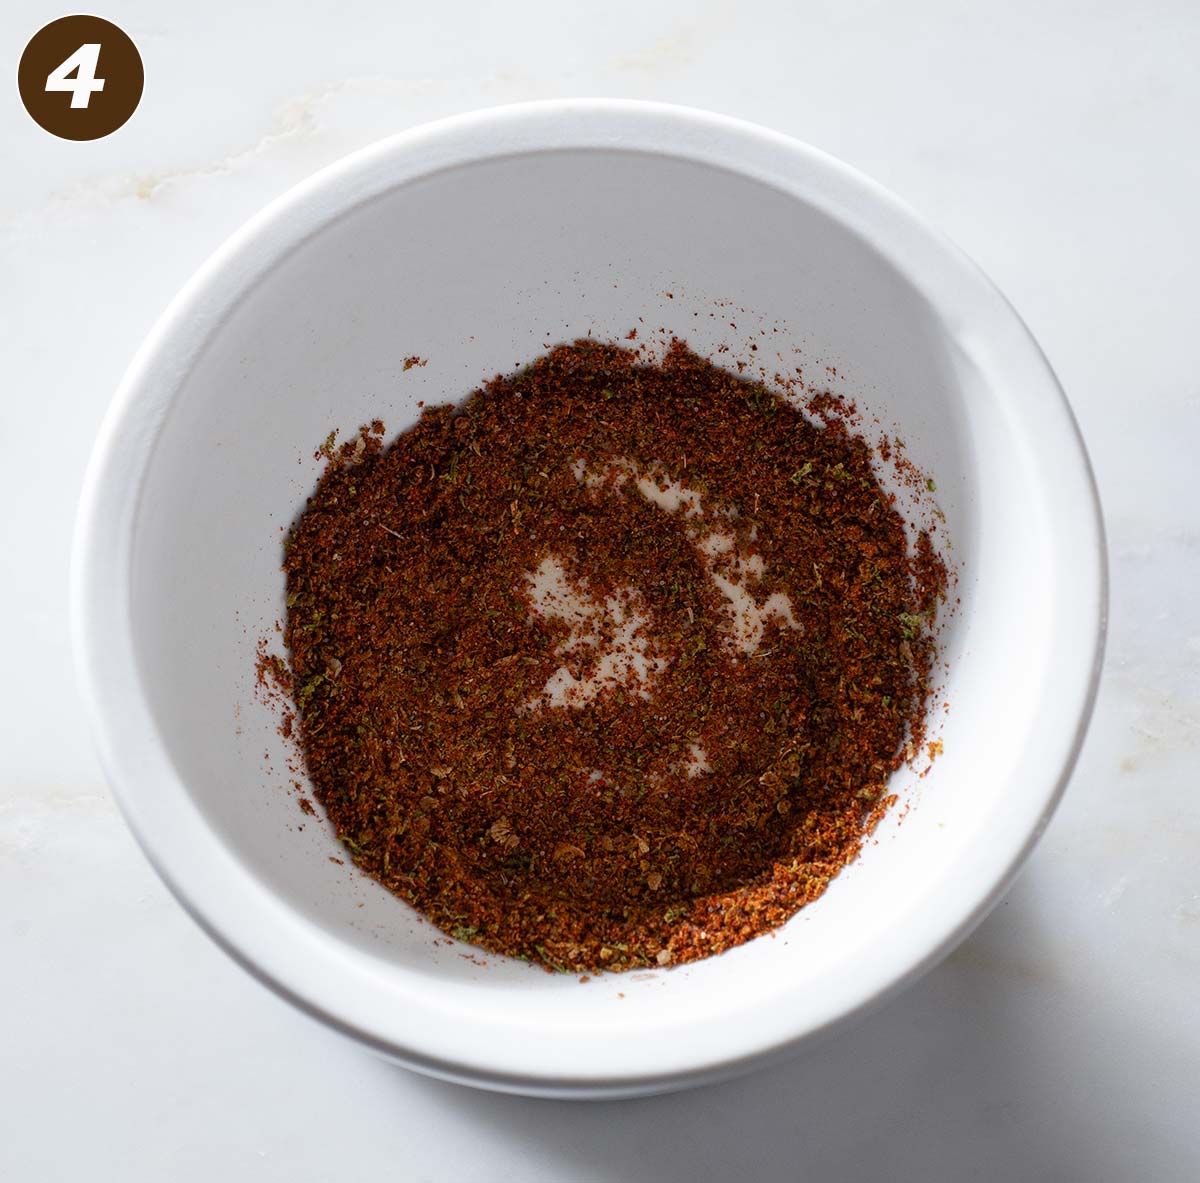 Chili lime seasoning in a mortar.